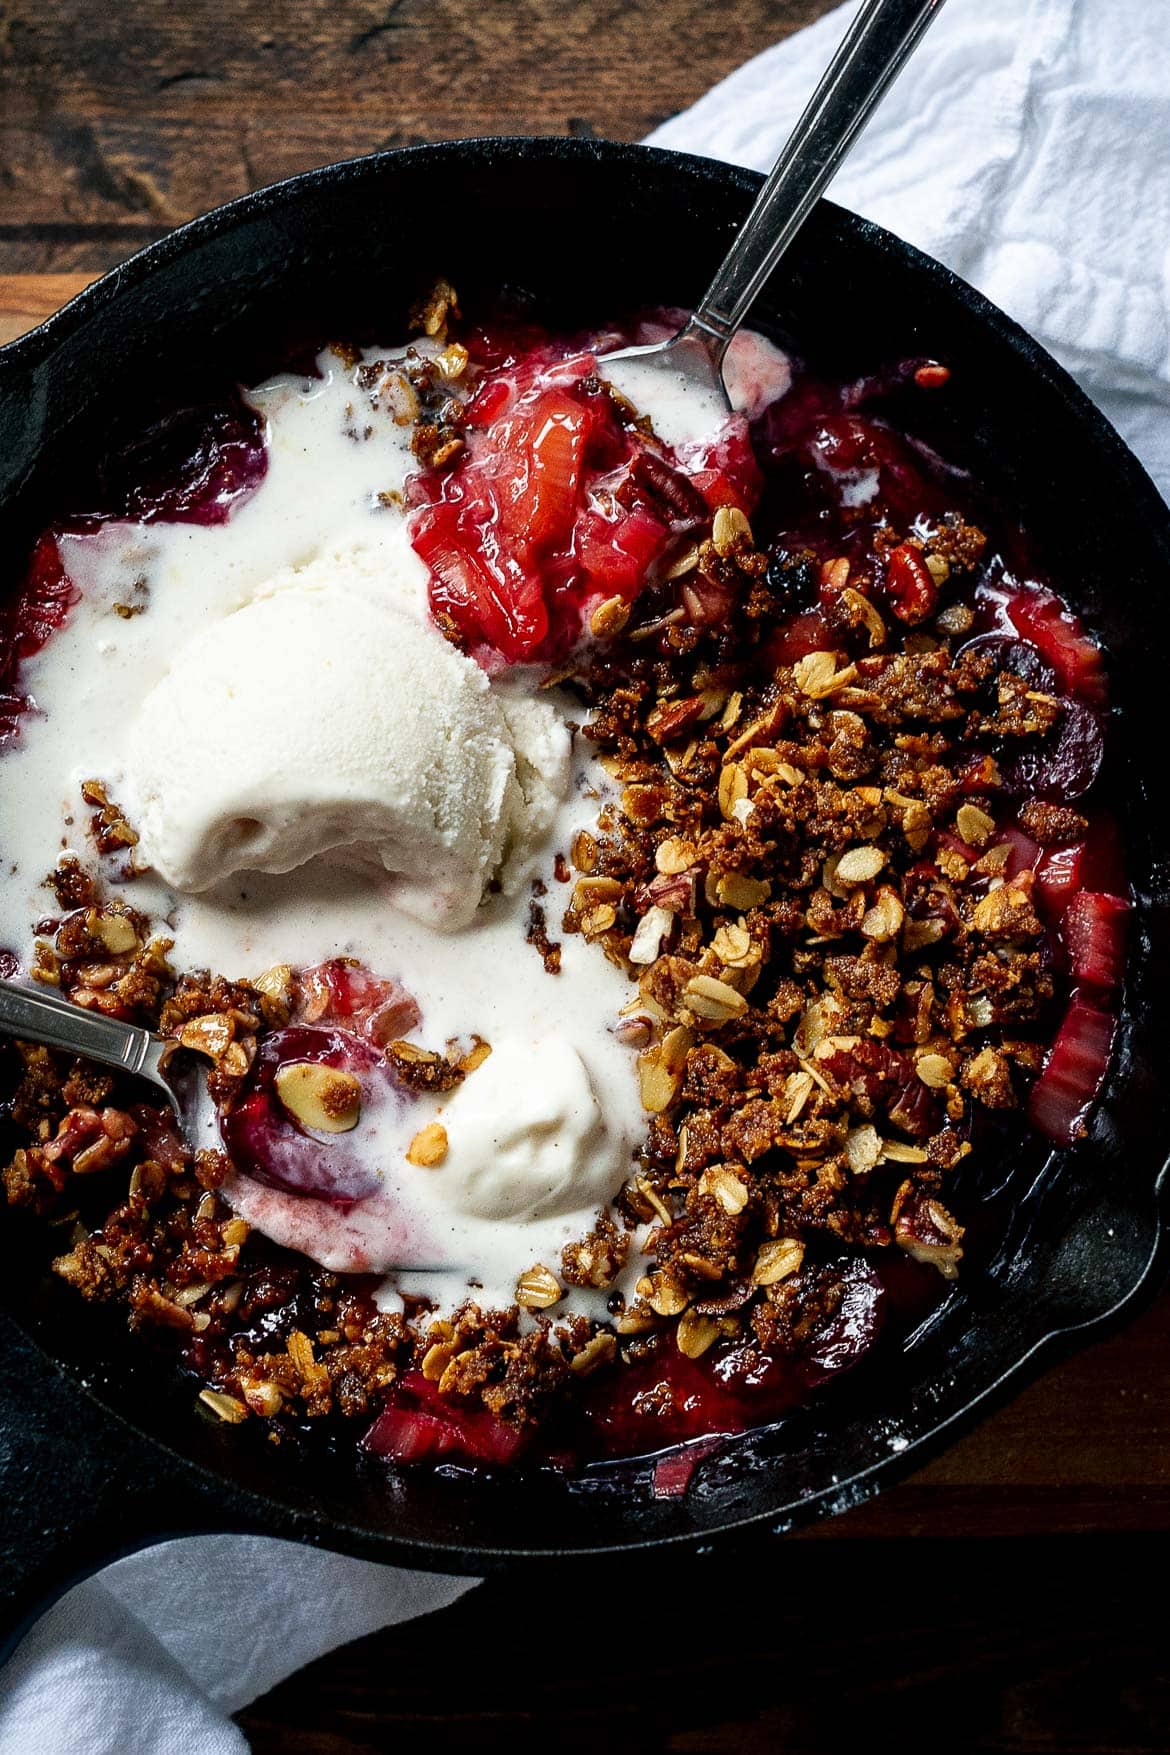 Stovetop Rhubarb-Cherry Crisp in a cast iron skillet on a wooden background.